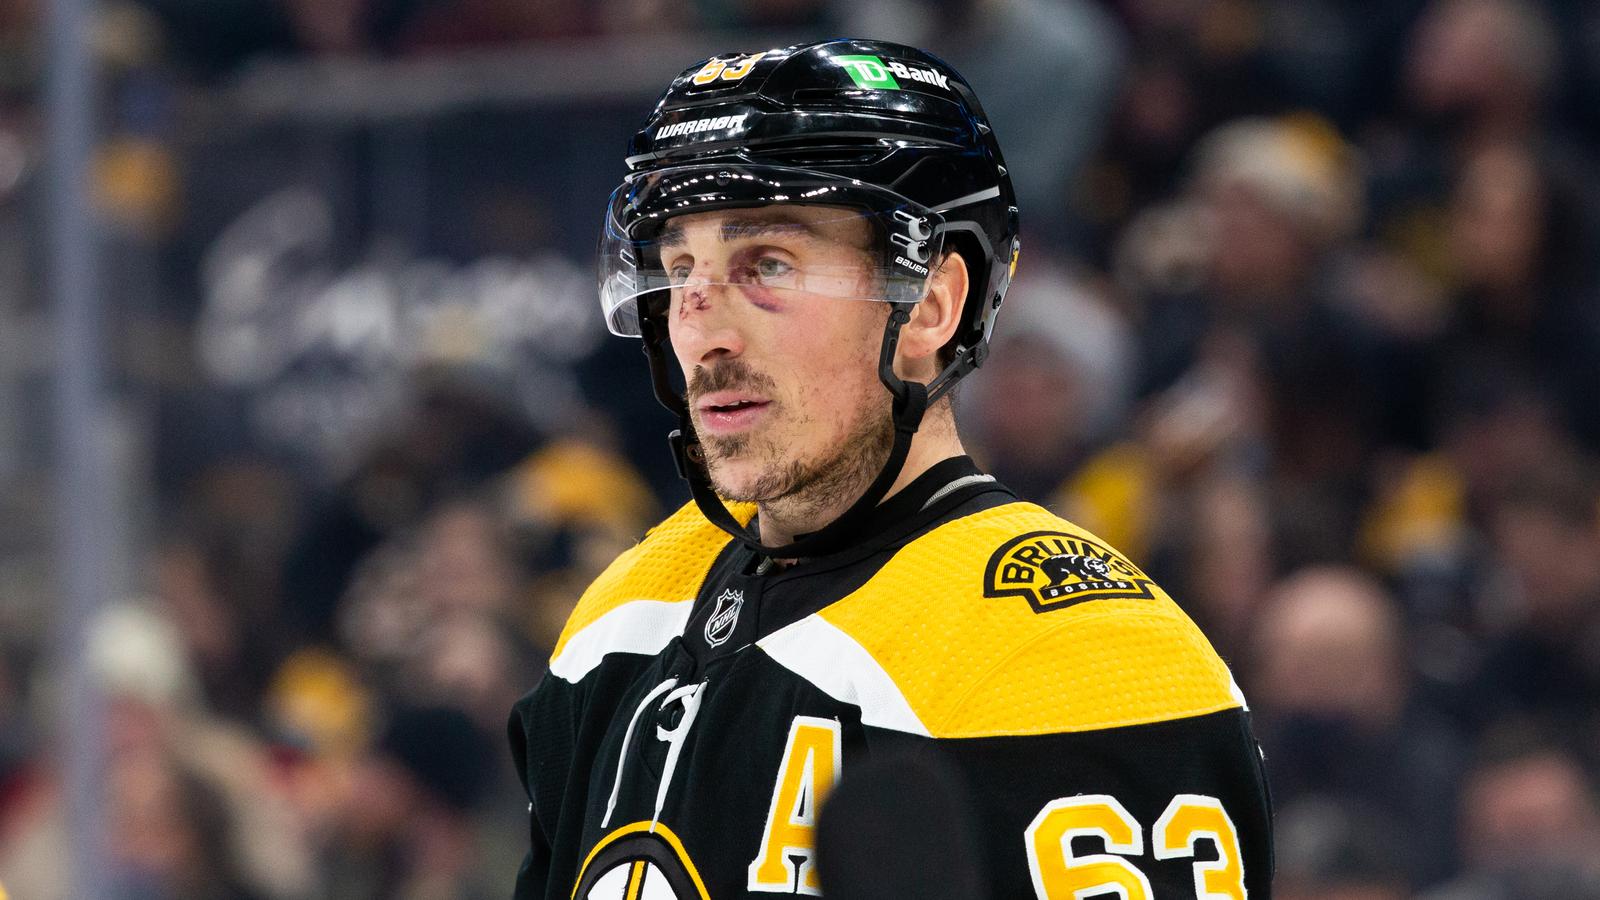 Bad news for Brad Marchand following Bruins’ elimination